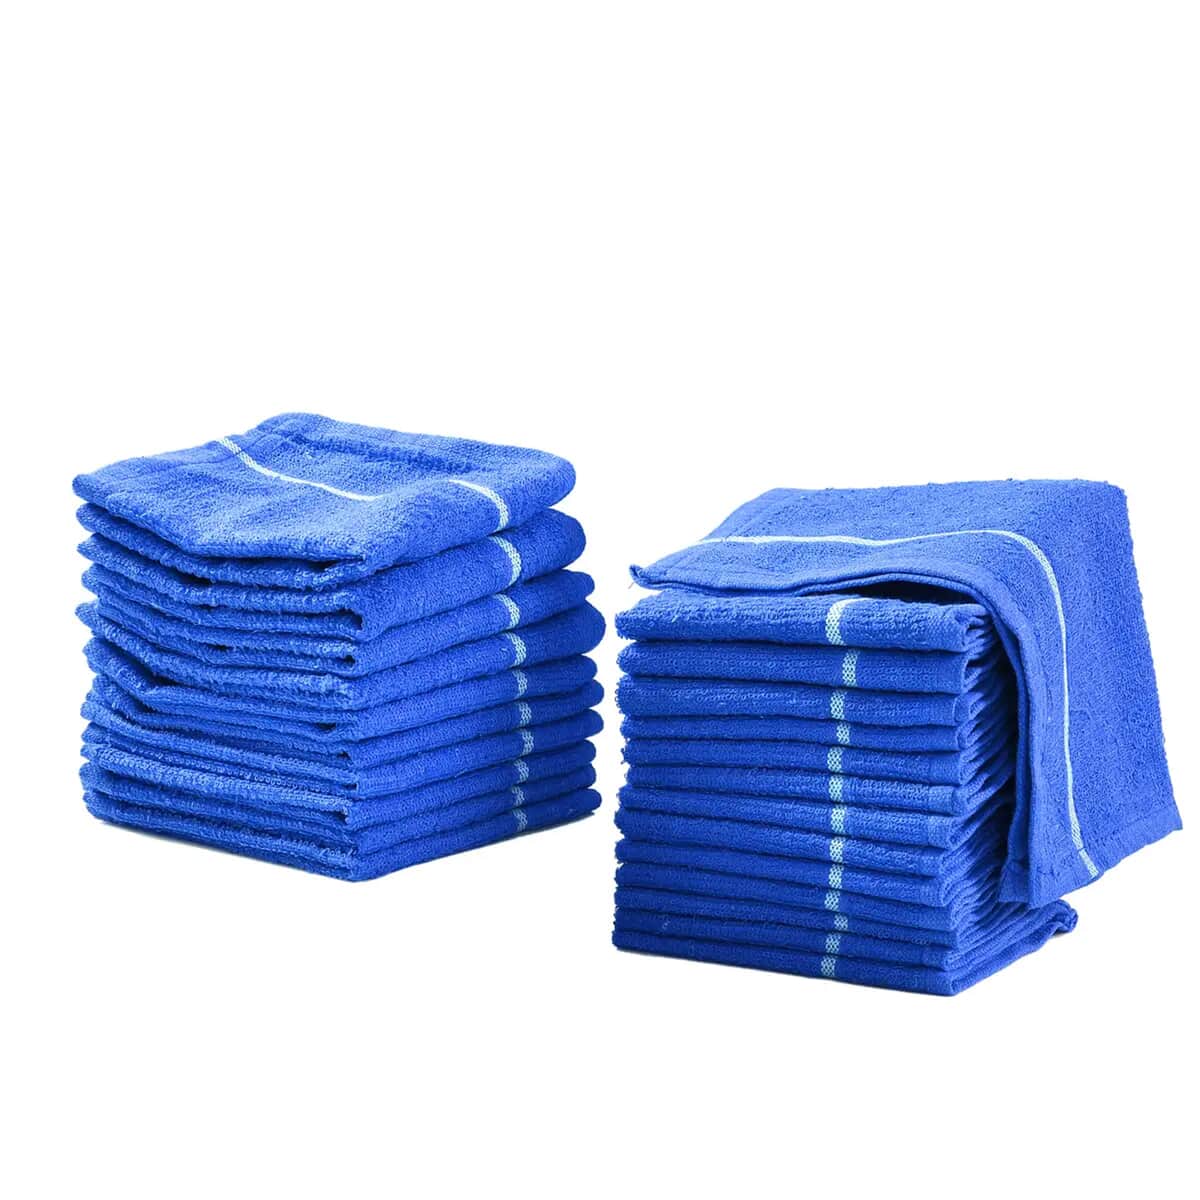 Set of 24pcs Cotton Dish Scrubbing Cleaning Cloth - Blue image number 0